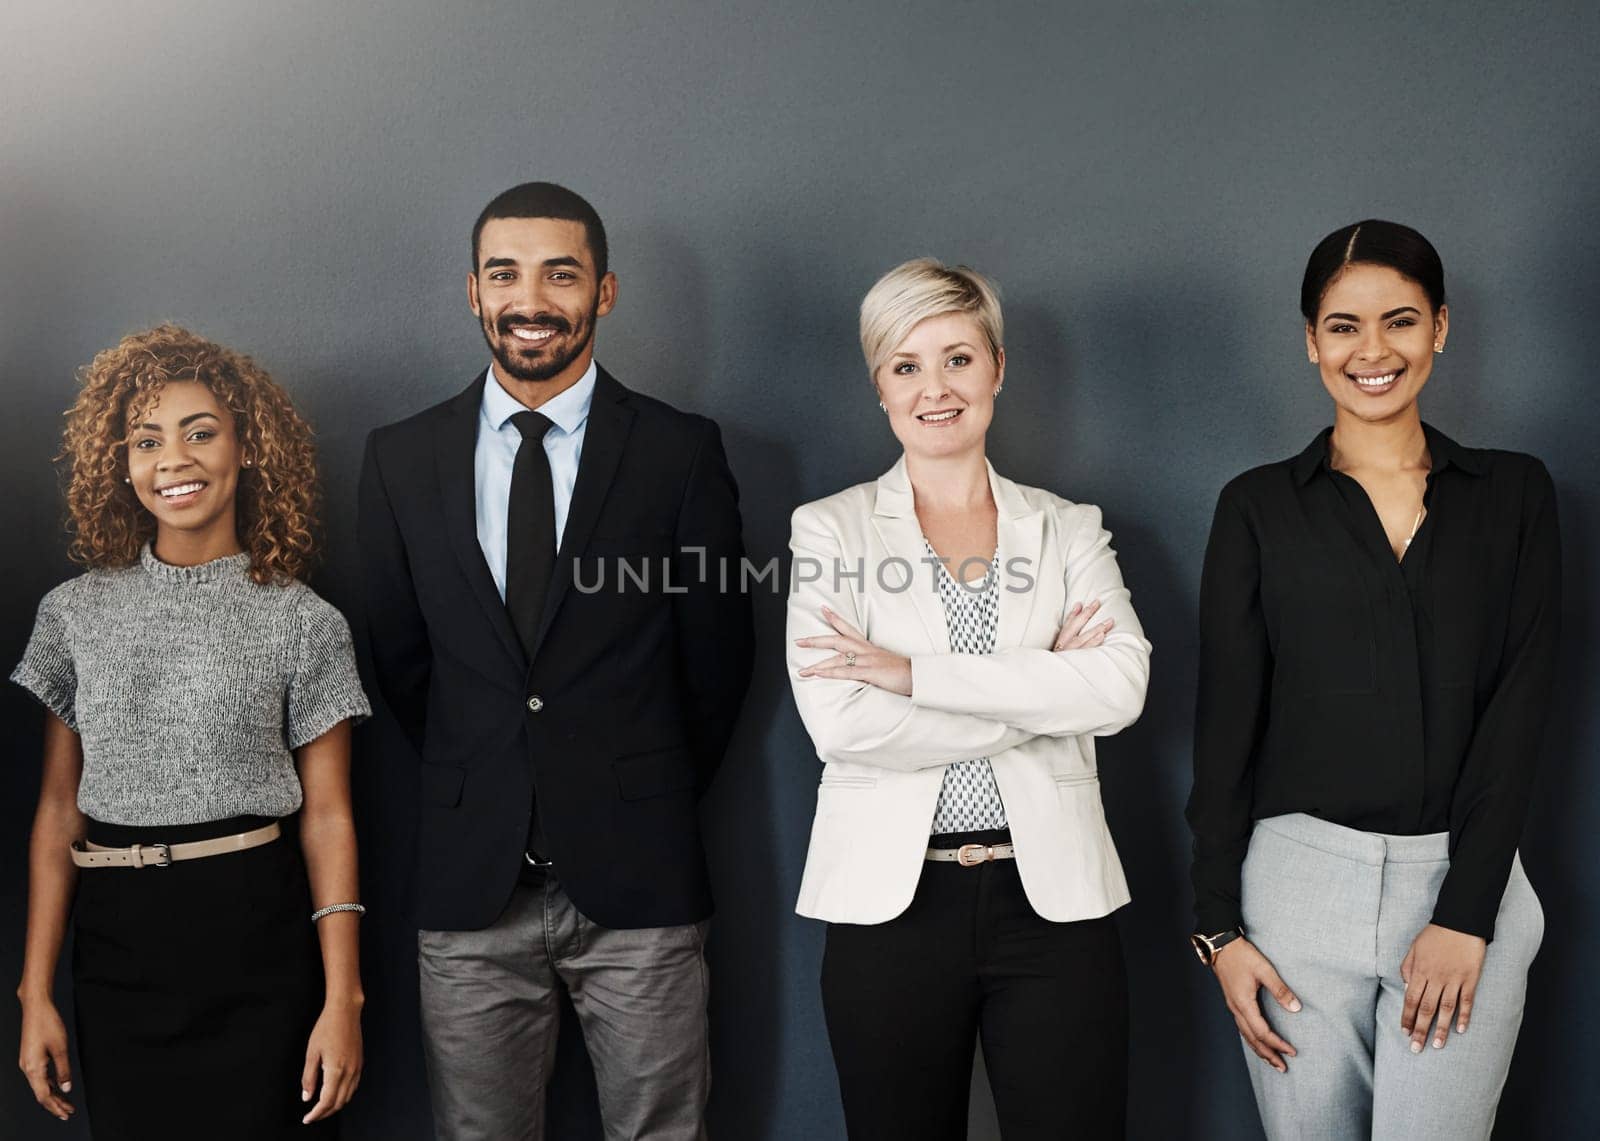 Diversity, support and portrait of business people in studio for smile, community and teamwork. Happy, collaboration and professional with employees and wall background for confidence and mission.